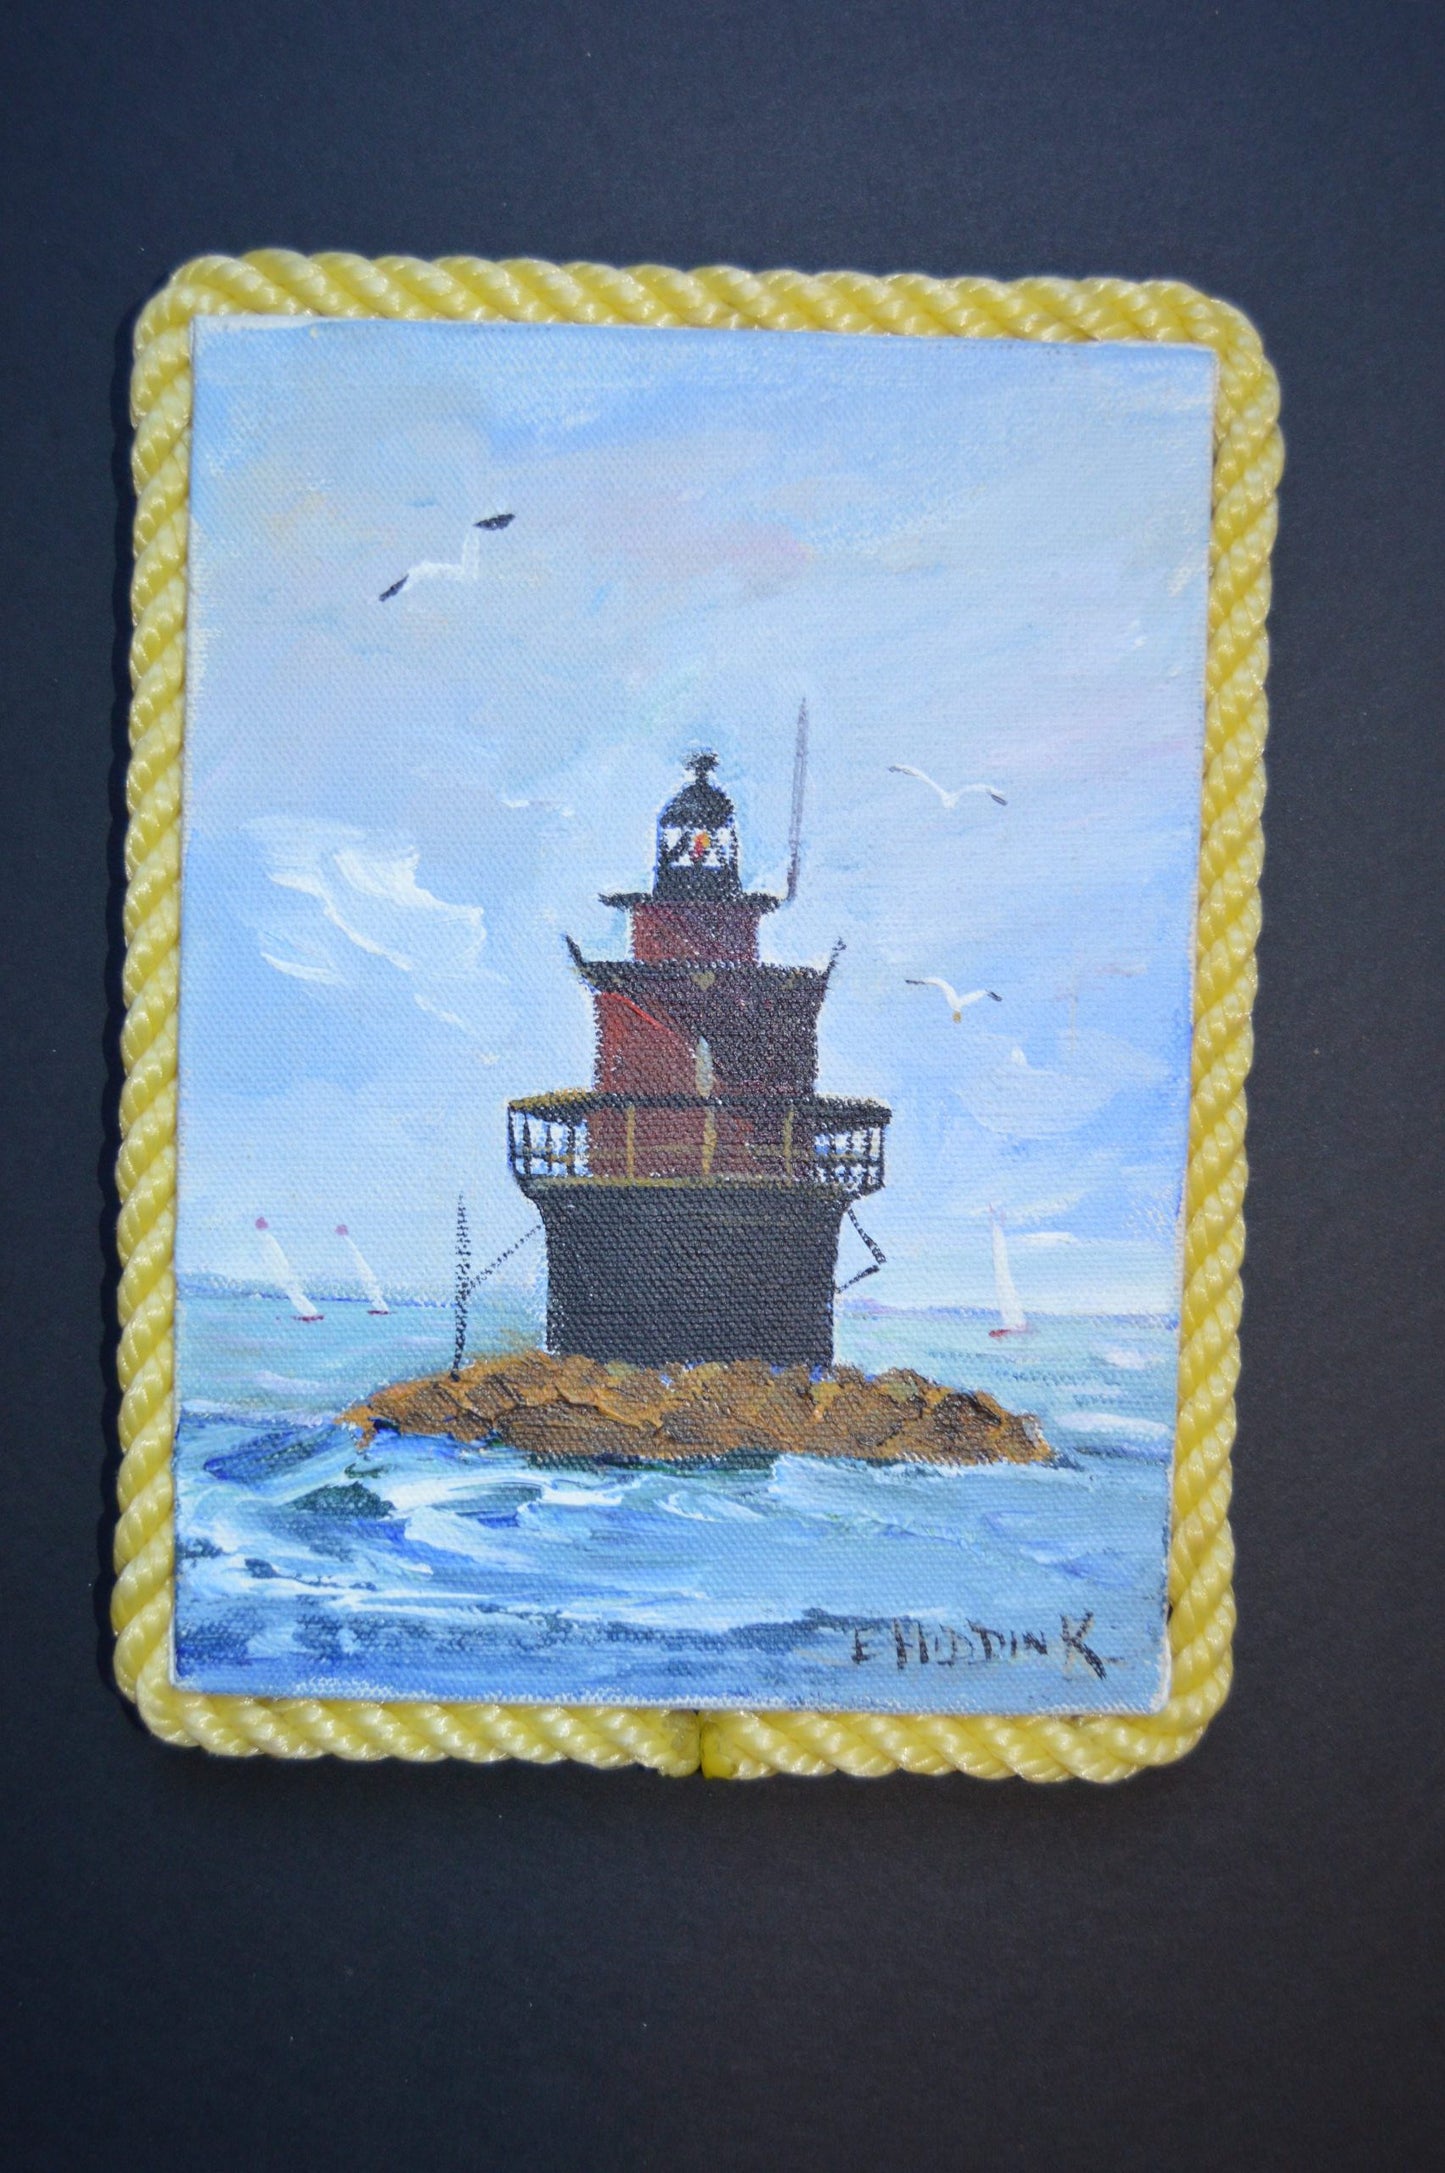 Orient Lighthouse by E. Hiddink